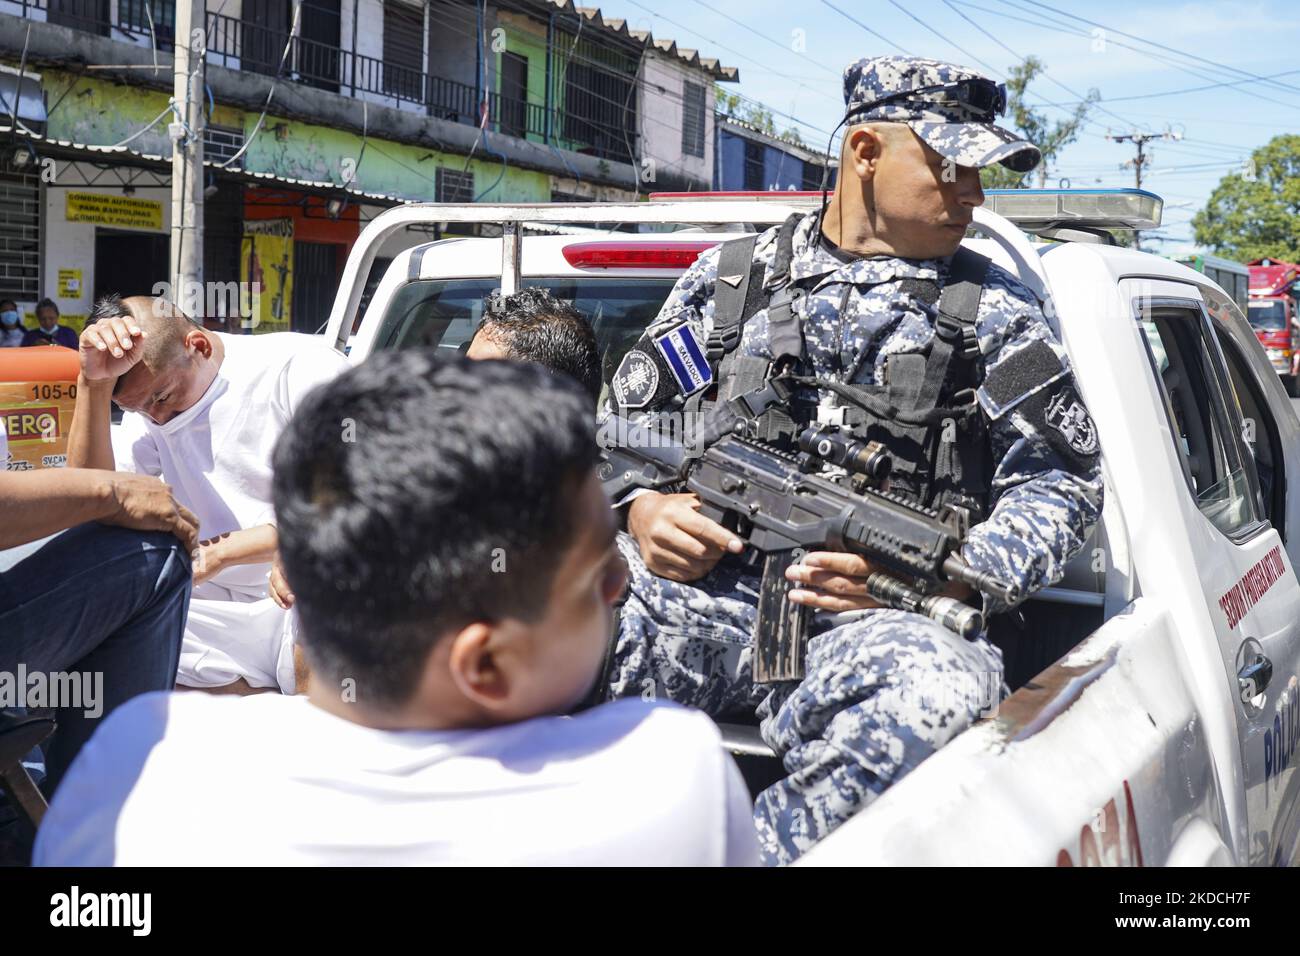 A police officer escorts alleged gang members into a detention center on June 22, 2022 in San Salvador, El Salvador. The Salvadoran government through the Salvadoran Congress extended a state of emergency put in place to hit gang structures for the fourth month in a row as the government reports more than 41,000 alleged gang members captured (Photo by Camilo Freedman/NurPhoto) Stock Photo